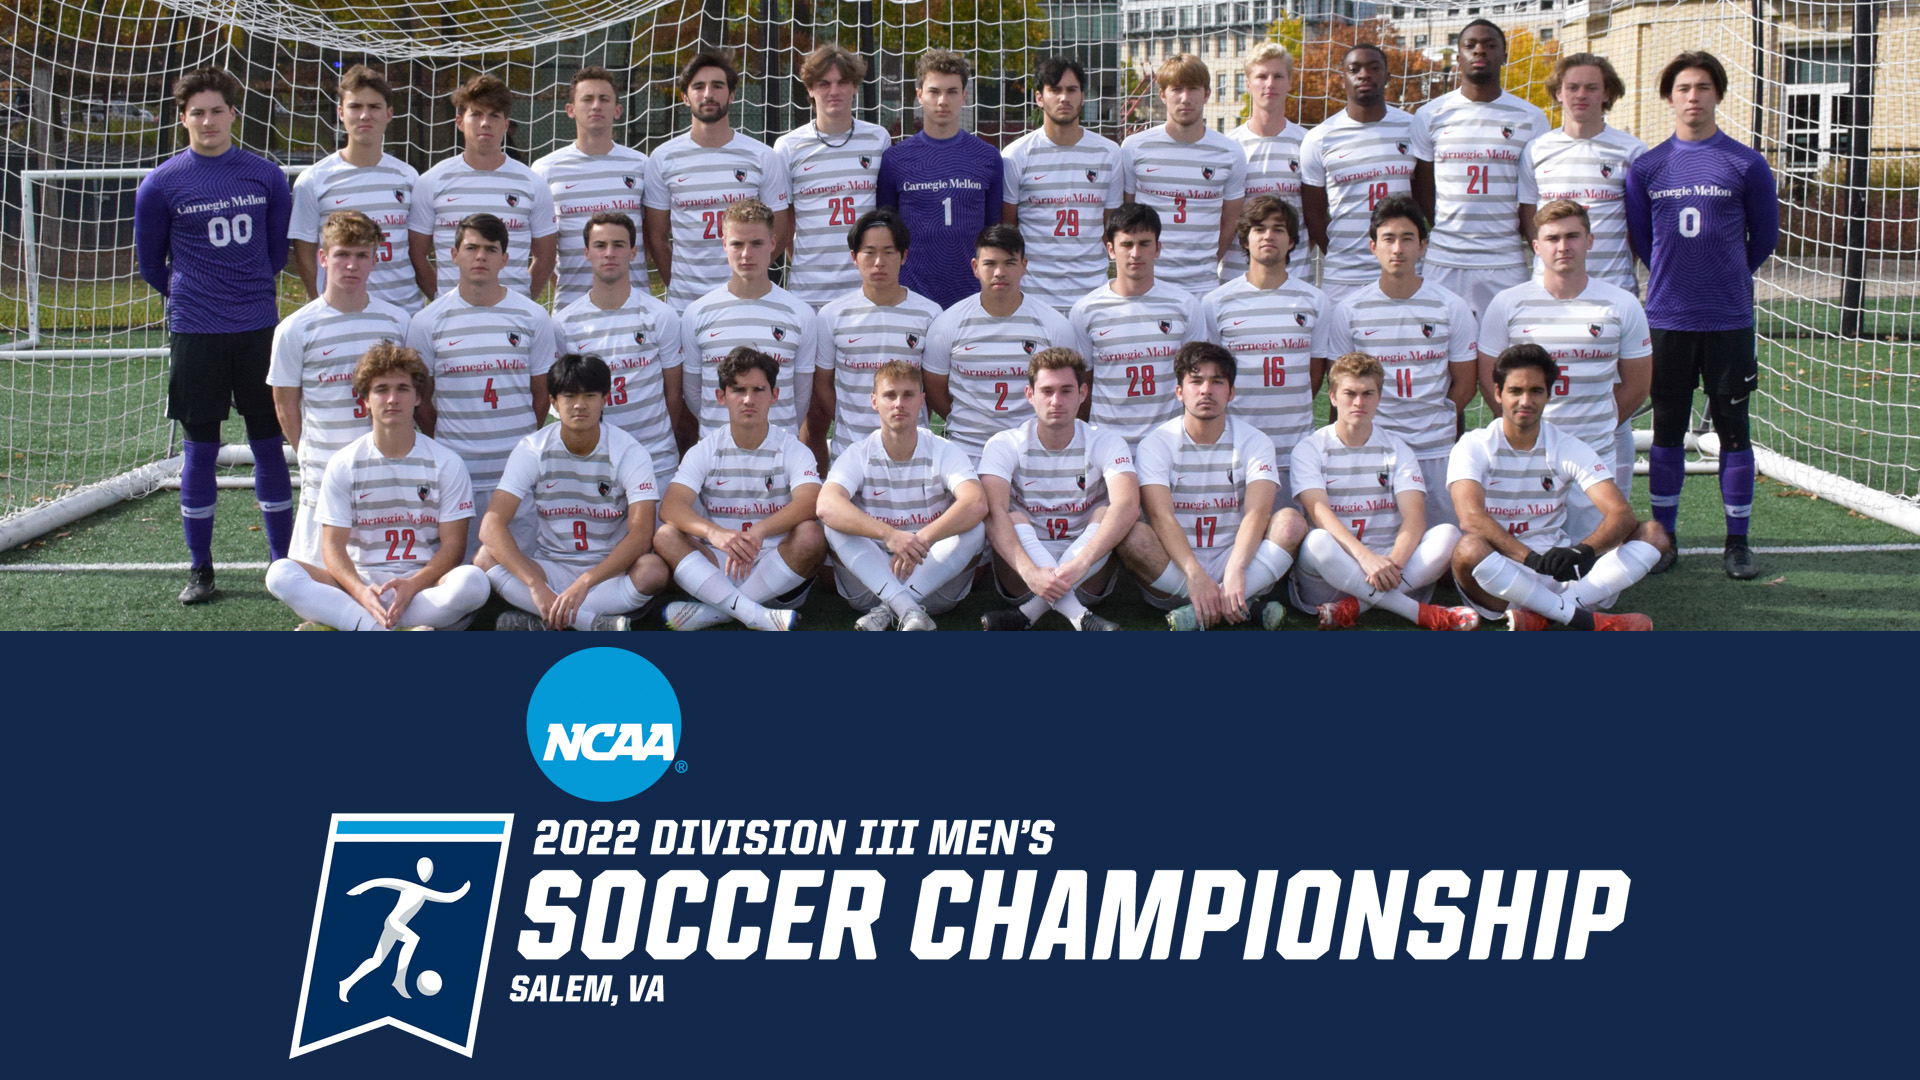 men's soccer team photo with players in three rows and text that reads 2022 Division III Men's Soccer Championship